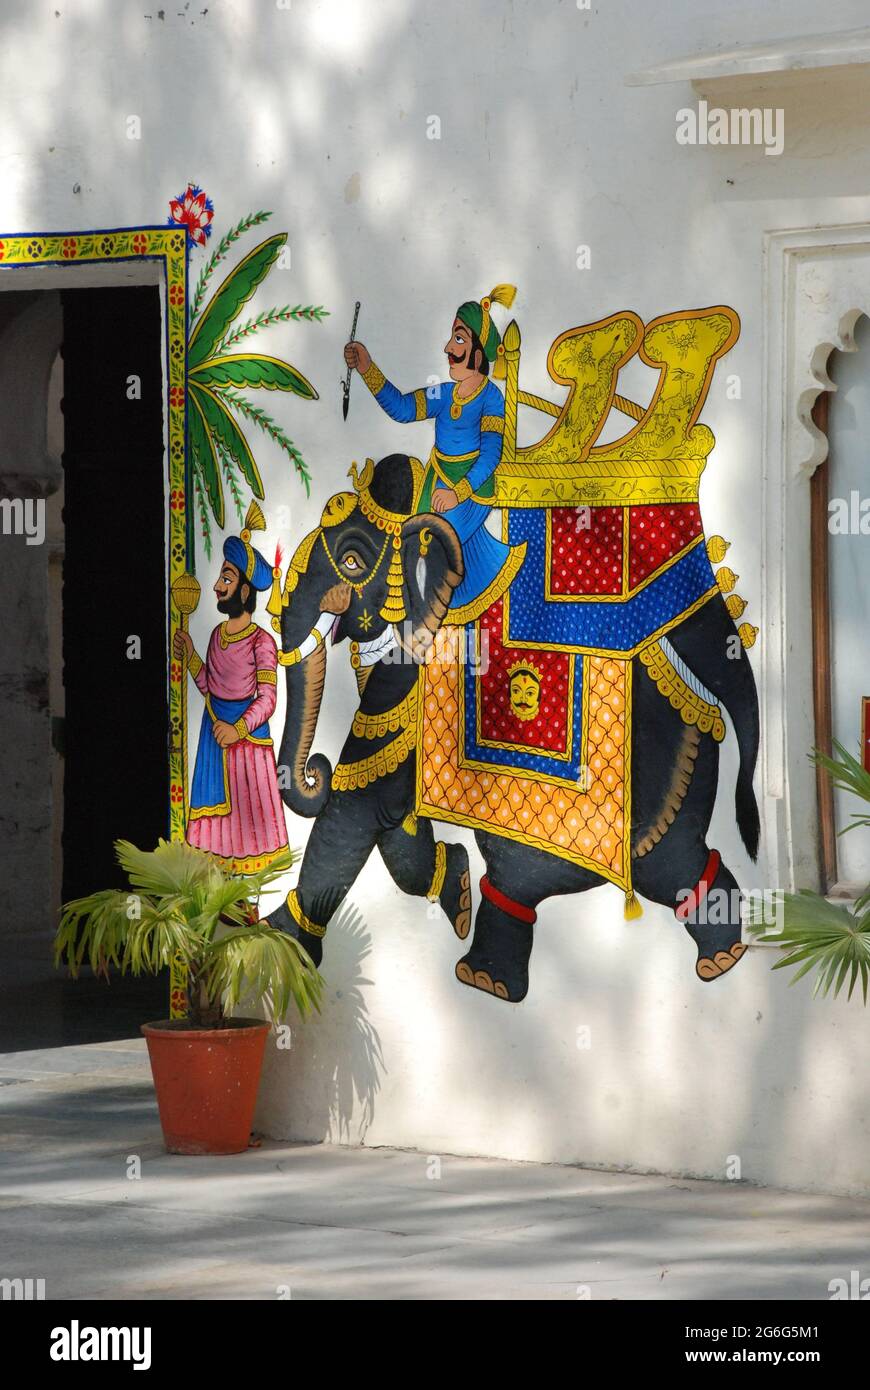 Indian elephant (Elephas maximus indicus, Elephas maximus bengalensis), house wall painted with an Indian elephant , India, Radschastan, Udaipur Stock Photo